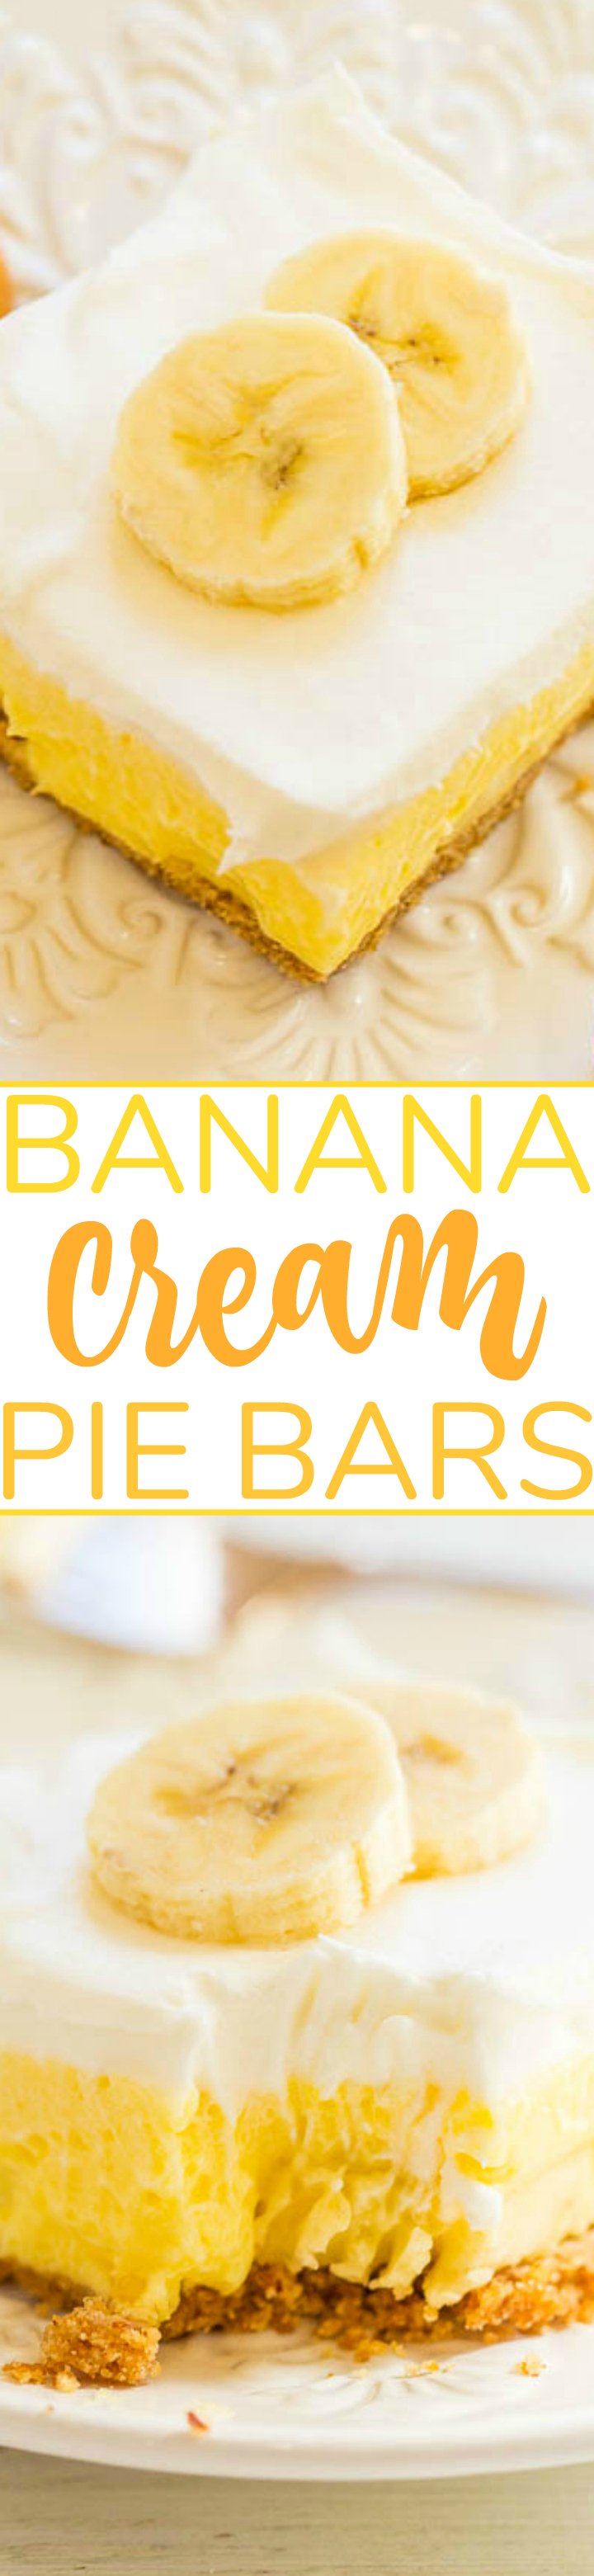 Banana Cream Pie Bars - Faster and easier than making a banana cream pie and taste AMAZING!! A crunchy crust, tender banana slices, luscious banana pudding, and creamy whipped topping make these layered pie bars WINNERS!!